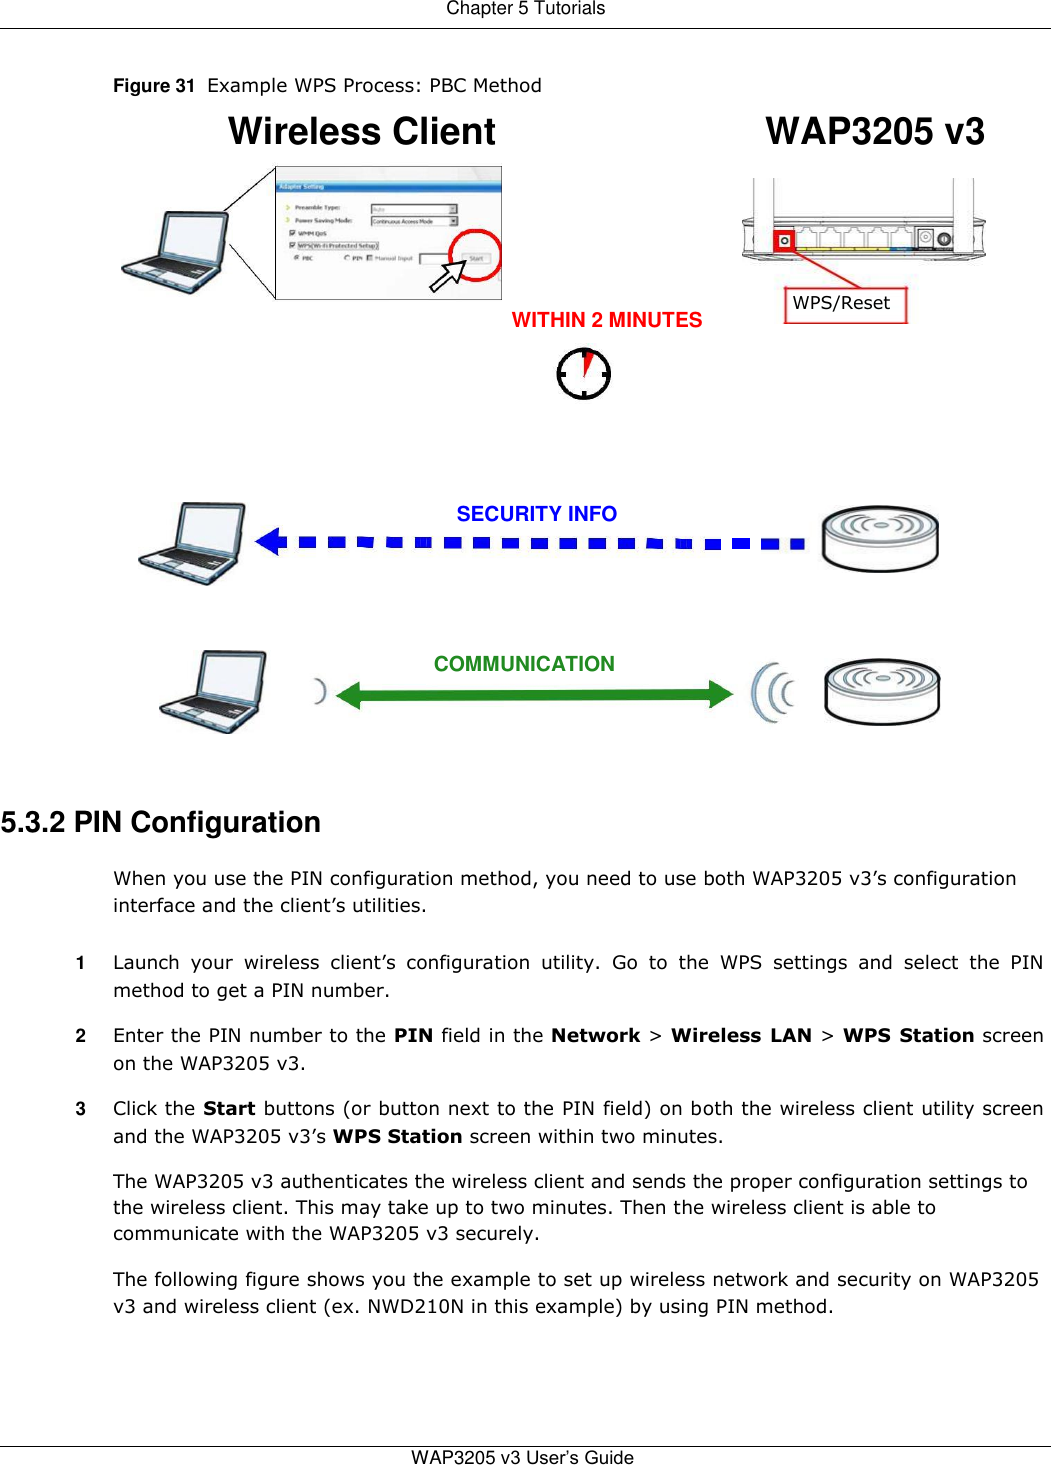 Chapter 5 Tutorials   Figure 31  Example WPS Process: PBC Method WAP3205 v3  Wireless Client         WITHIN 2 MINUTES         SECURITY INFO       COMMUNICATION       5.3.2 PIN Configuration       WPS/Reset  When you use the PIN configuration method, you need to use both WAP3205 v3’s configuration interface and the client’s utilities.  1  Launch  your  wireless  client’s  configuration  utility.  Go  to  the  WPS  settings  and  select  the  PIN method to get a PIN number.  2  Enter the PIN number to the PIN field in the Network &gt; Wireless LAN &gt; WPS  Station screen on the WAP3205 v3.  3  Click the Start buttons (or button next to the PIN field) on both the wireless client utility screen and the WAP3205 v3’s WPS Station screen within two minutes.  The WAP3205 v3 authenticates the wireless client and sends the proper configuration settings to the wireless client. This may take up to two minutes. Then the wireless client is able to communicate with the WAP3205 v3 securely.  The following figure shows you the example to set up wireless network and security on WAP3205 v3 and wireless client (ex. NWD210N in this example) by using PIN method.      WAP3205 v3 User’s Guide   